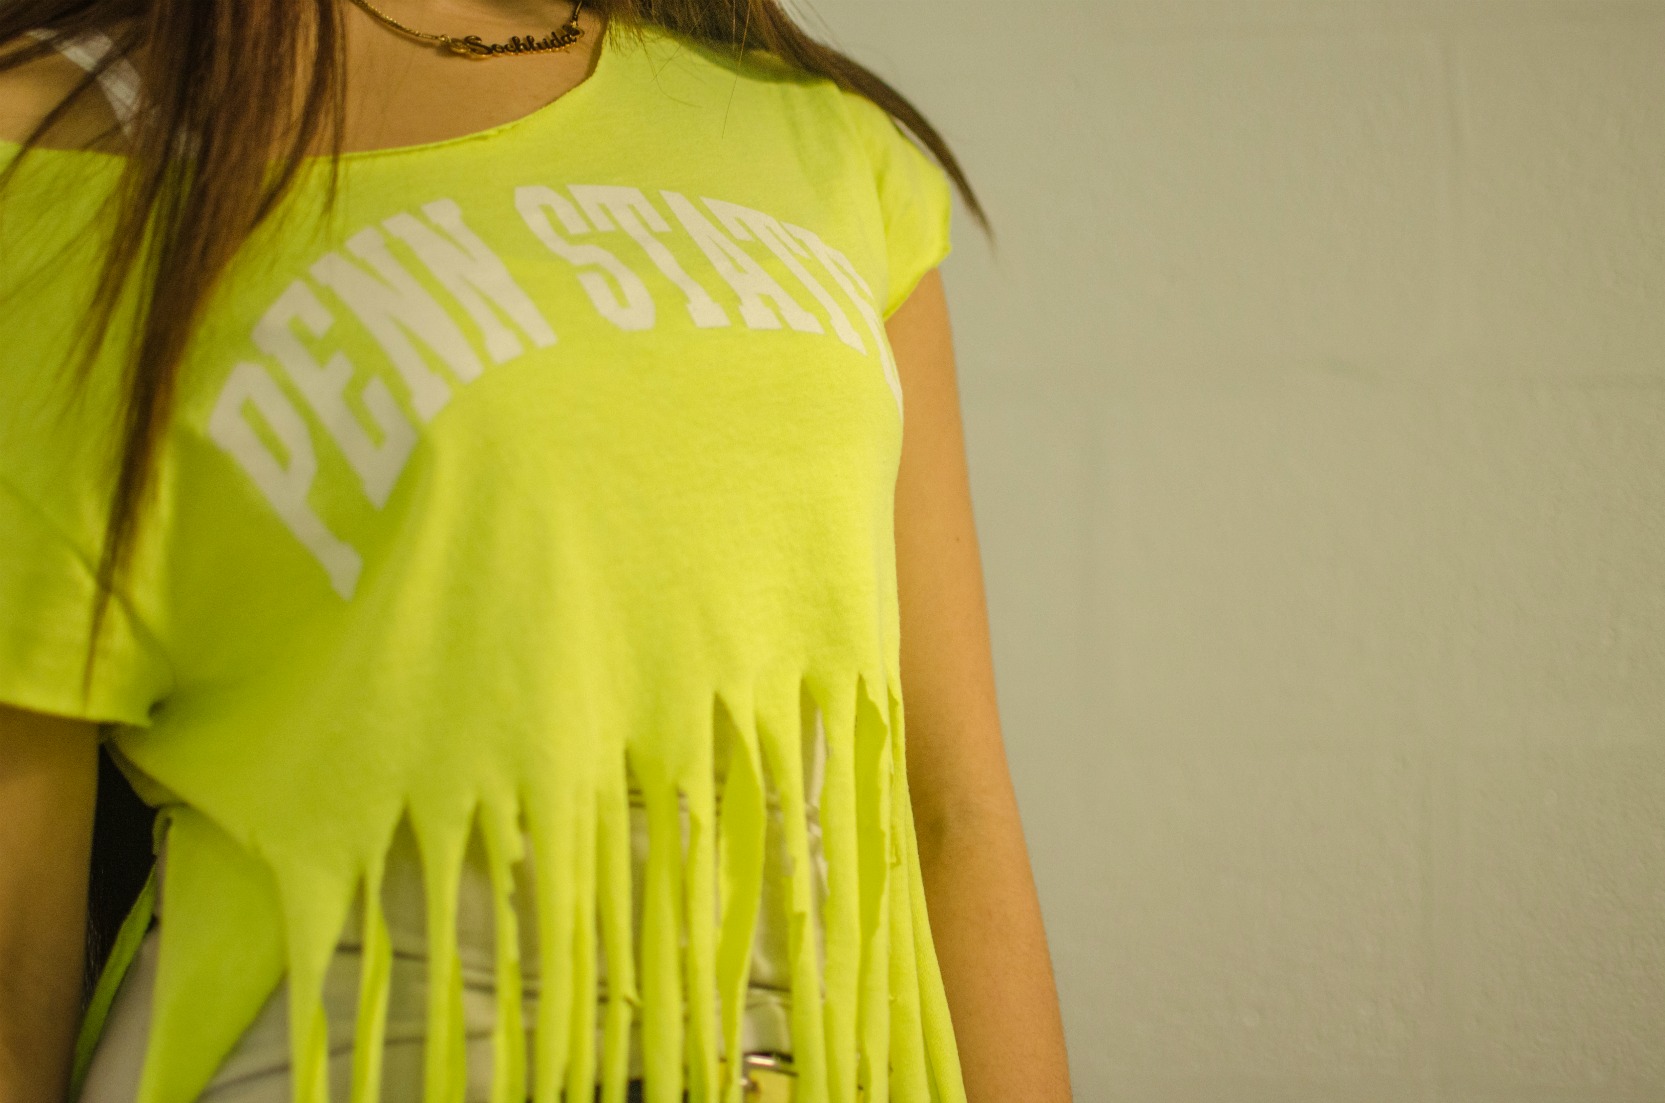 Highlighting the Do’s and Dont’s of Wearing Neon